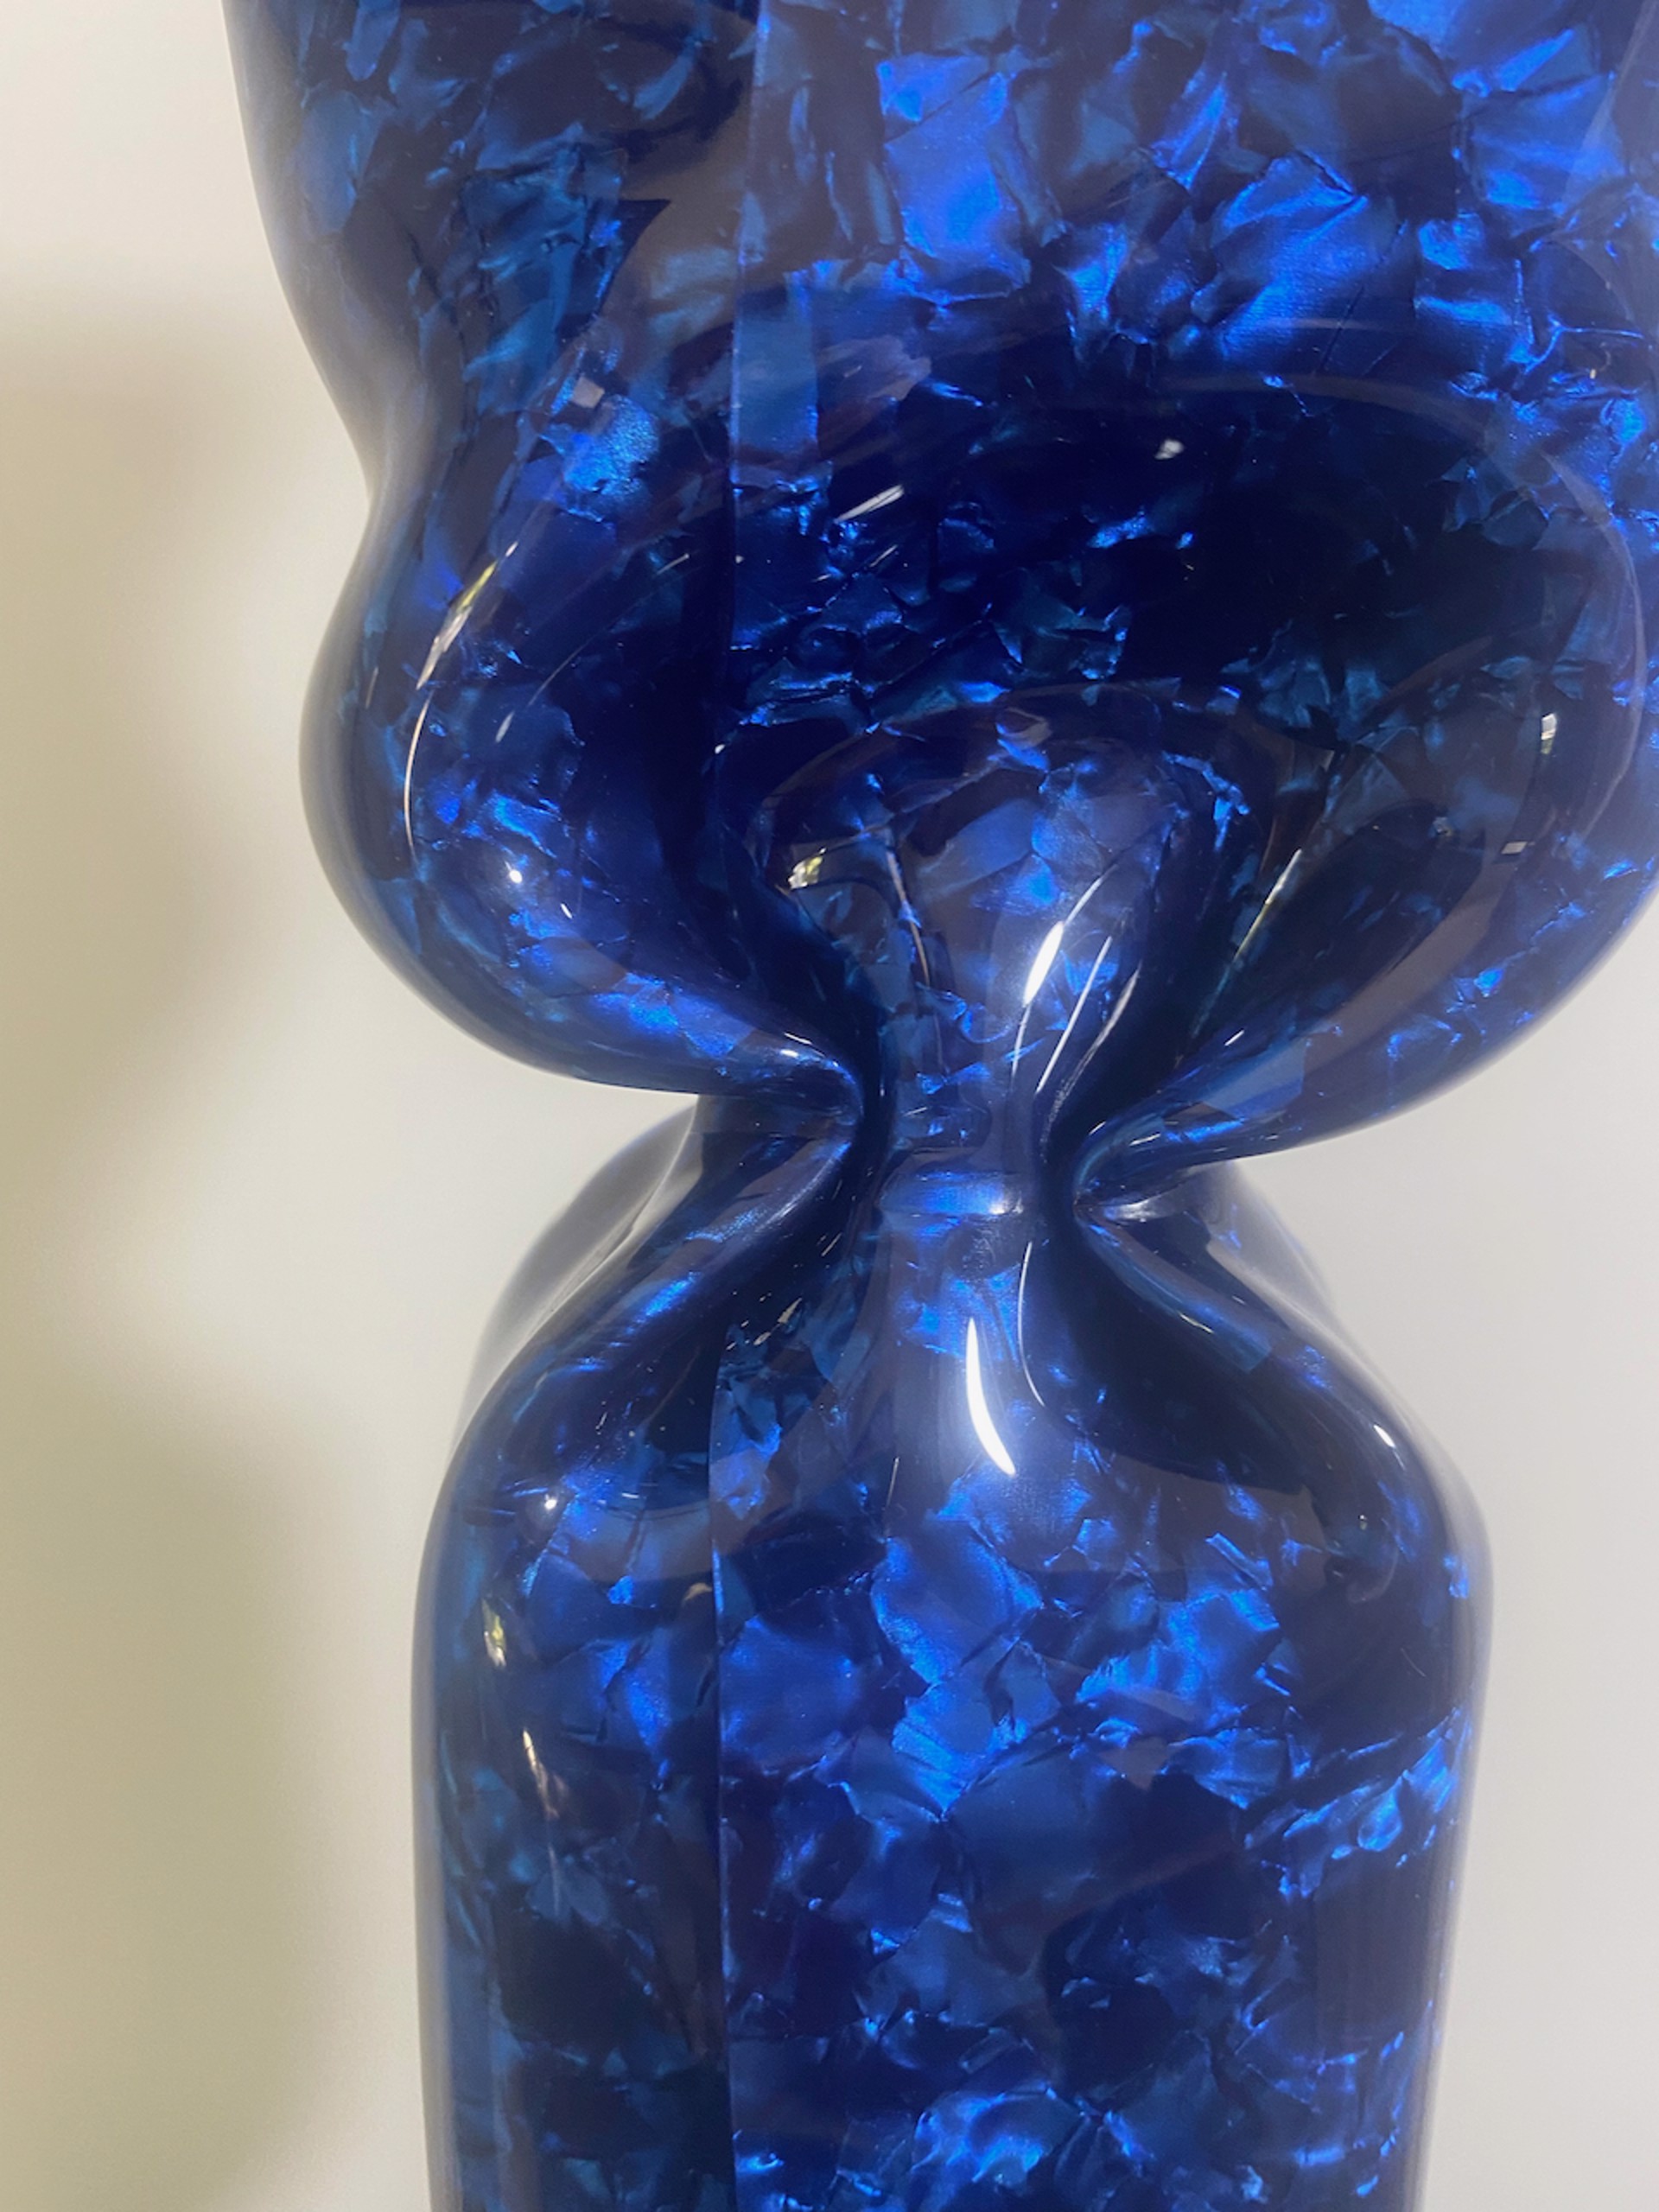 Wrapping Bonbon Celluloid Night Blue by Laurence Jenkell